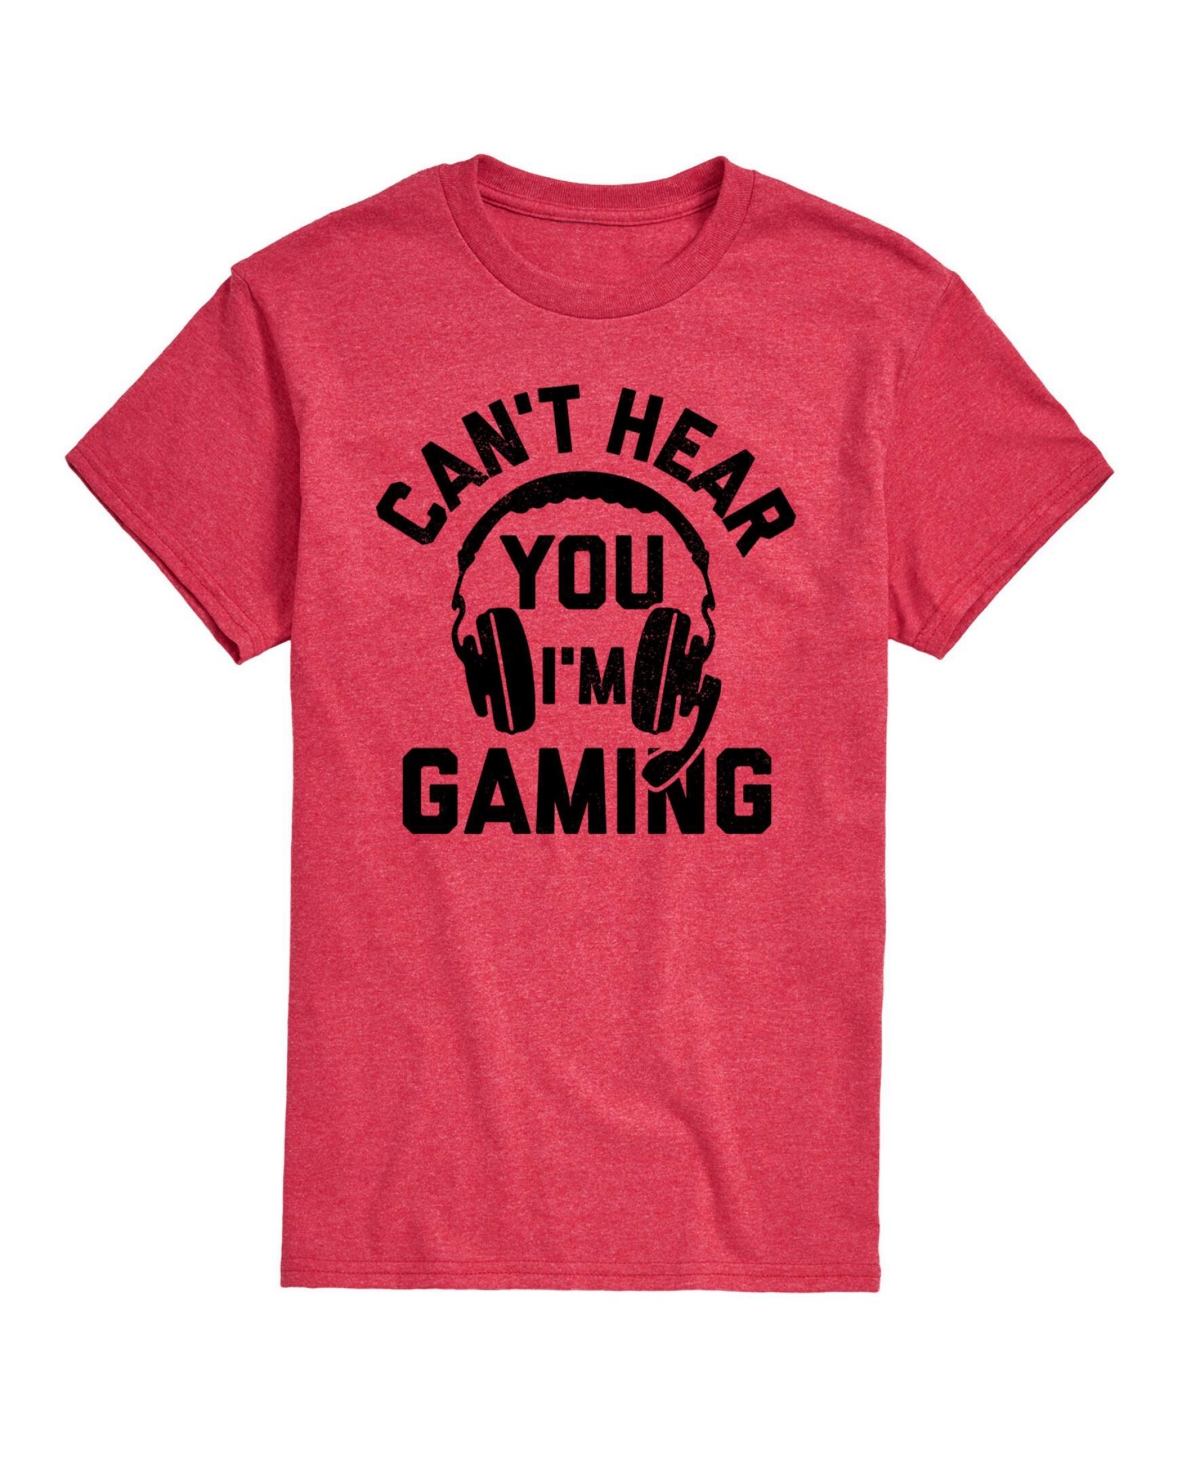 Hybrid Apparel Can't Hear You Gaming Mens Short Sleeve Tee - Heather Red